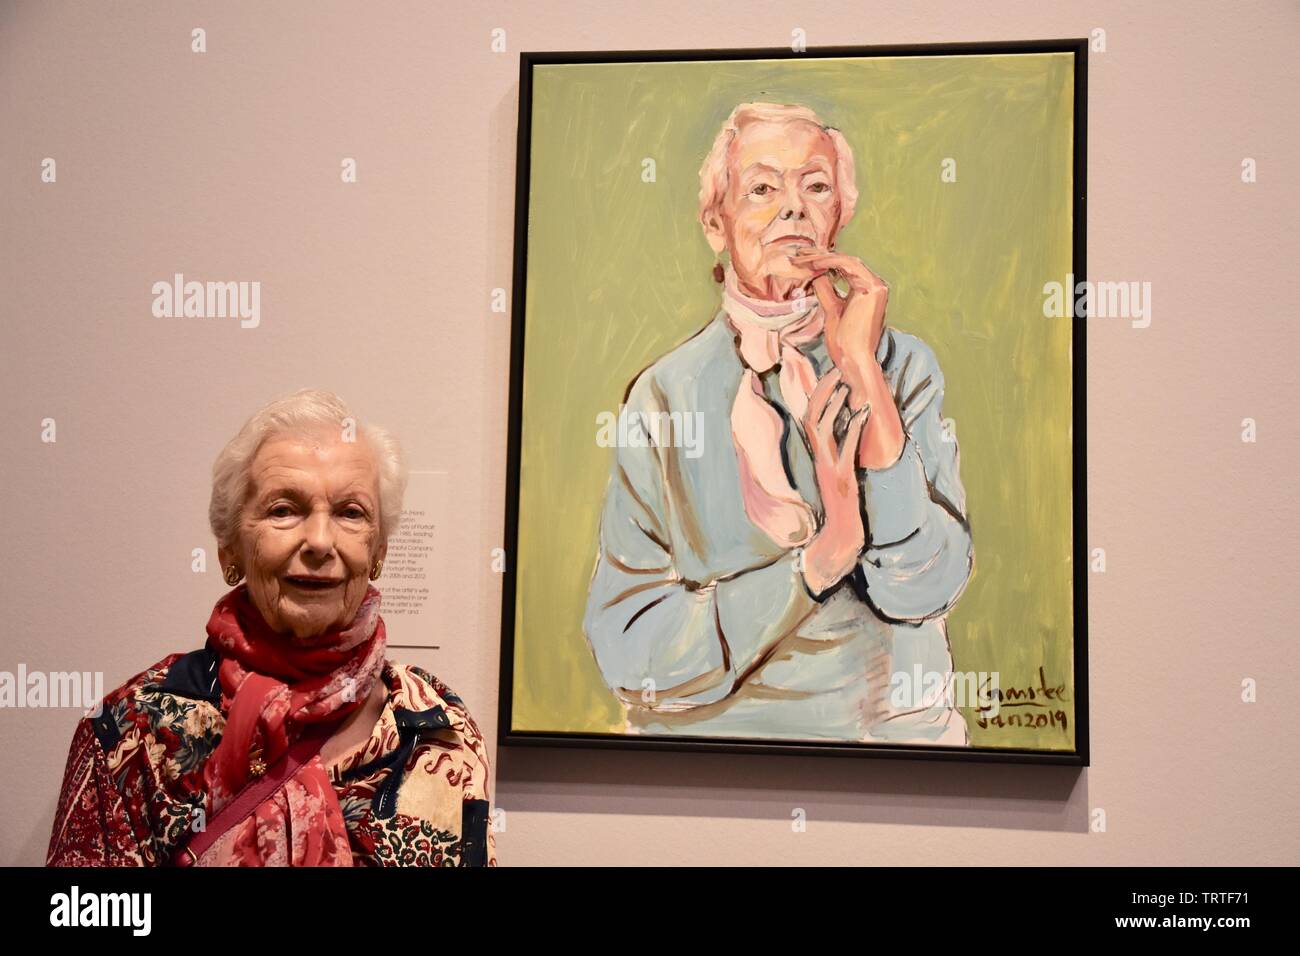 London, UK. Model Theresa poses with Aunty Theresa by Gandee Vasan, BP Portrait Award 2019 Press Day, The exhibitions runs from 13 June to 20 October 2019. National Portrait Gallery, St Martin's Place, London. UK Credit: michael melia/Alamy Live News Stock Photo